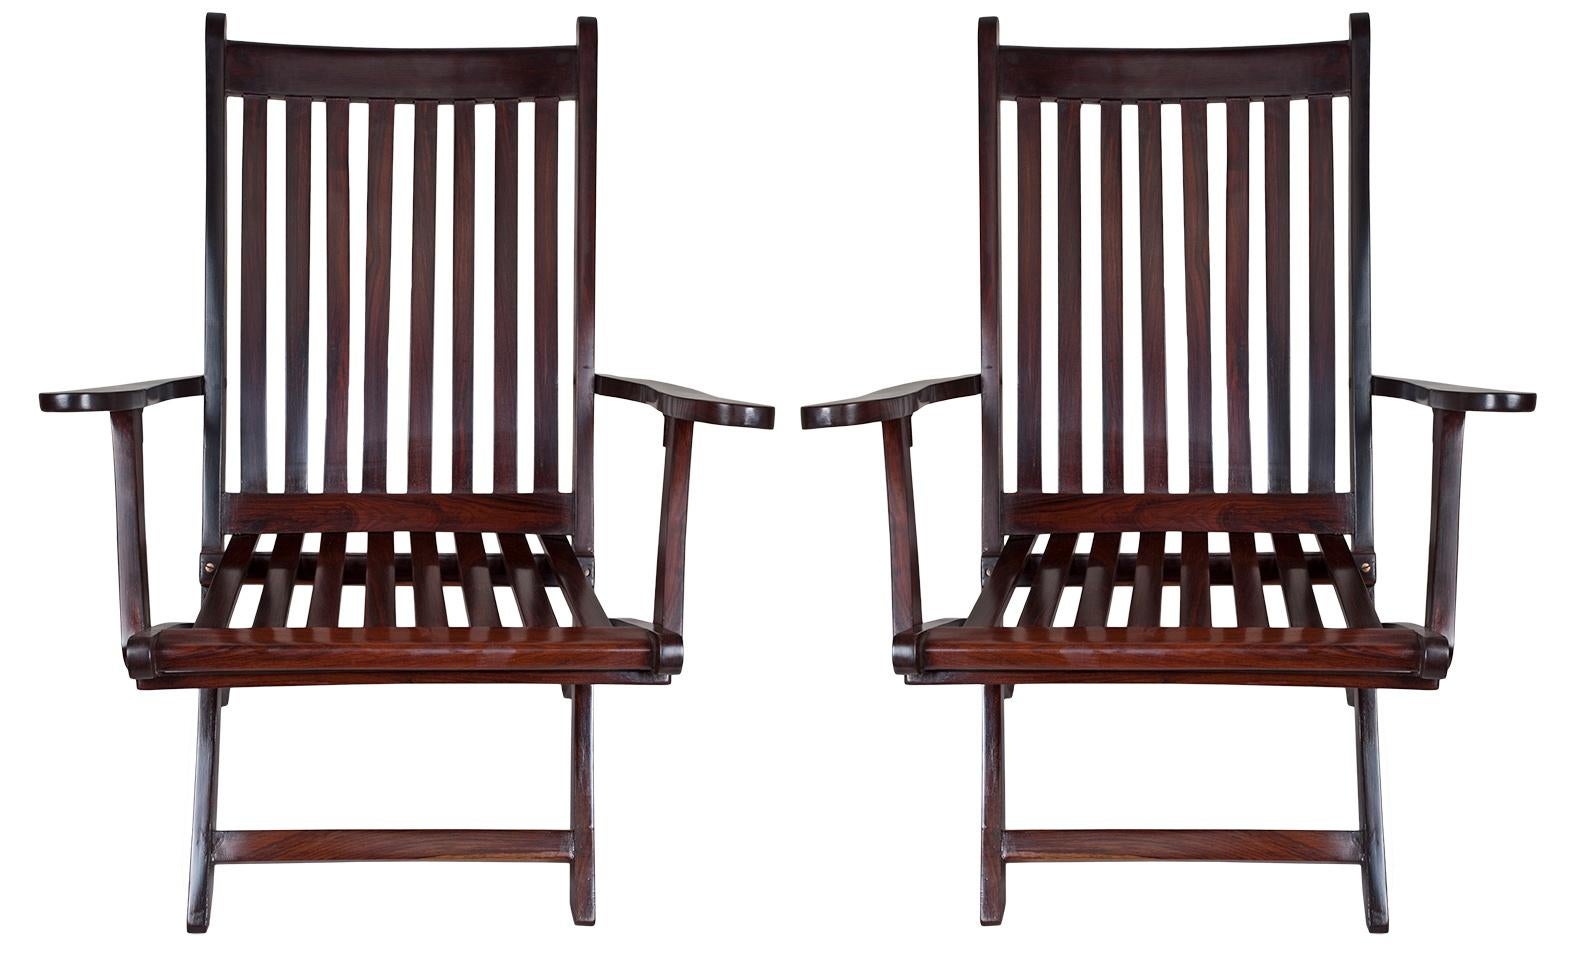 Pair of folding rosewood steamer chairs from the 1930s. Used by passengers on the deck during sea voyages. British. Refinished slatted rosewood and slightly reclined back for comfort.  Use on your deck, patio, veranda or inside as a side chair.